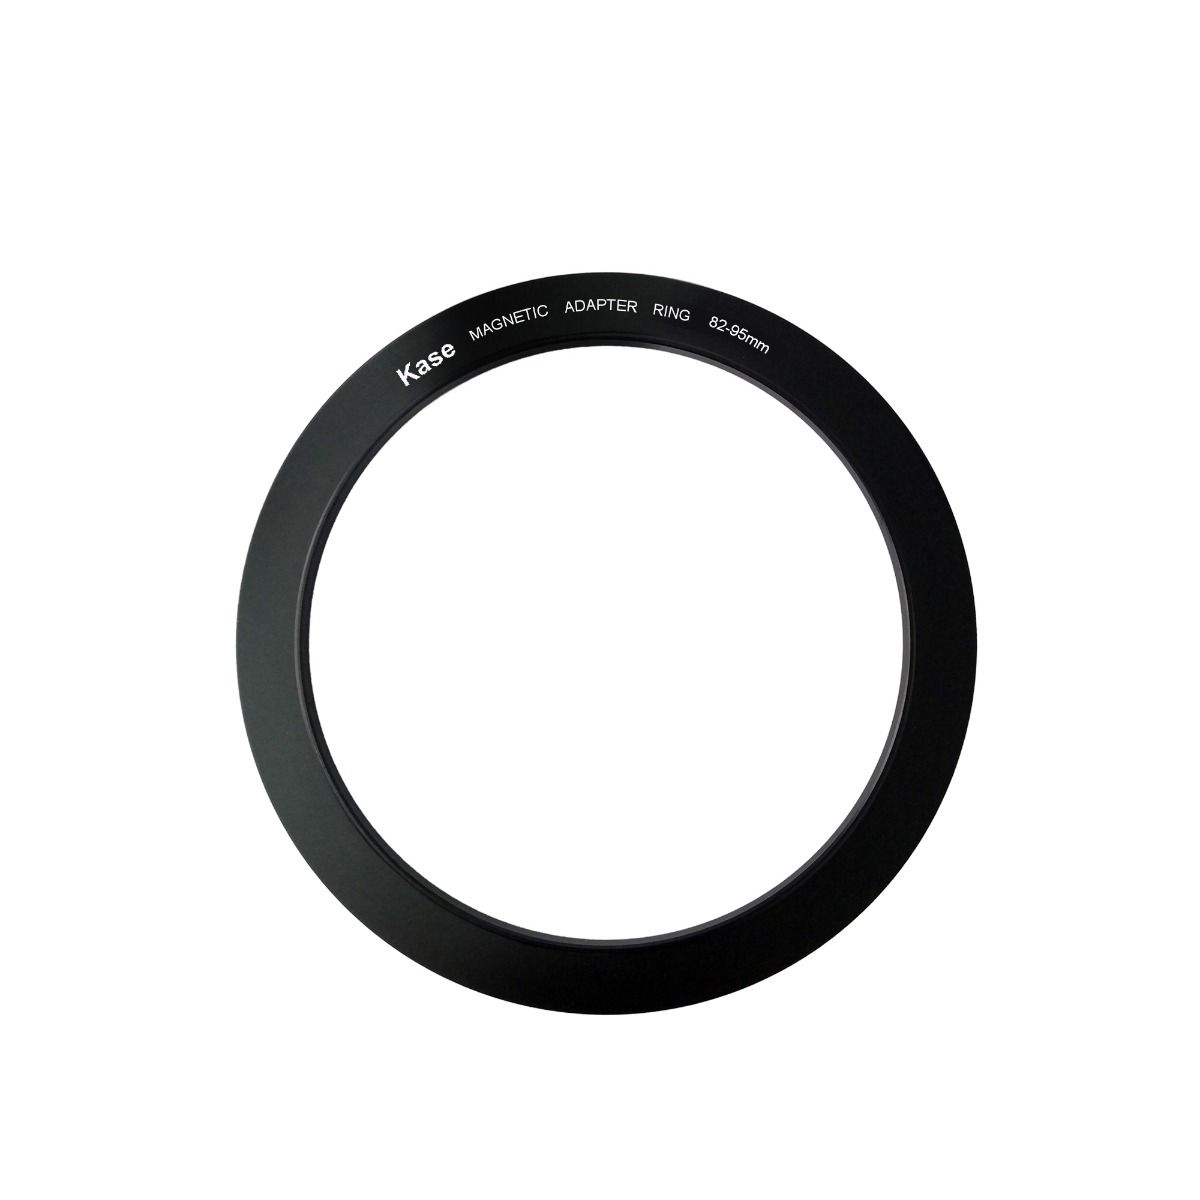 Product Image of Kase 72-95mm magnetic circular step up ring